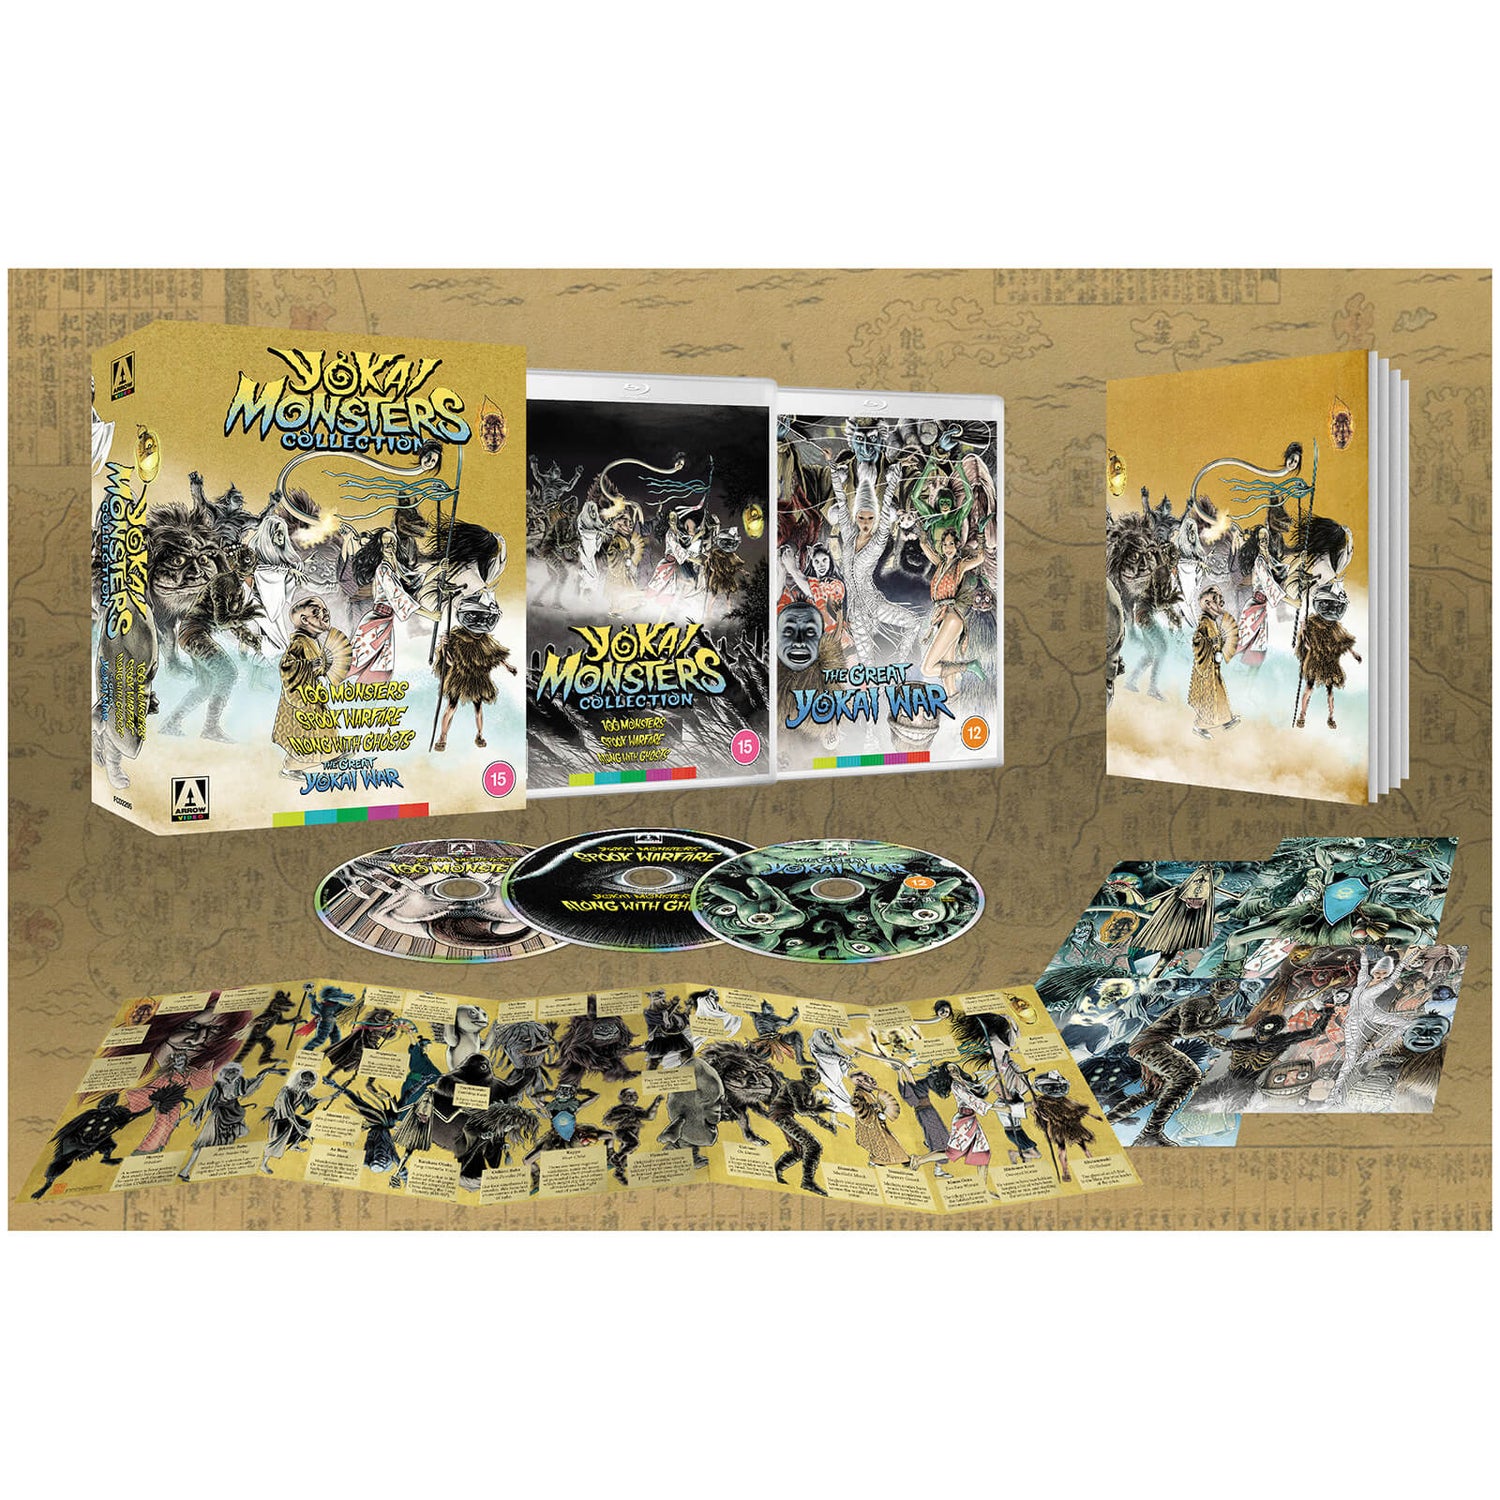 Yokai Monsters Collection Limited Edition Blu-ray